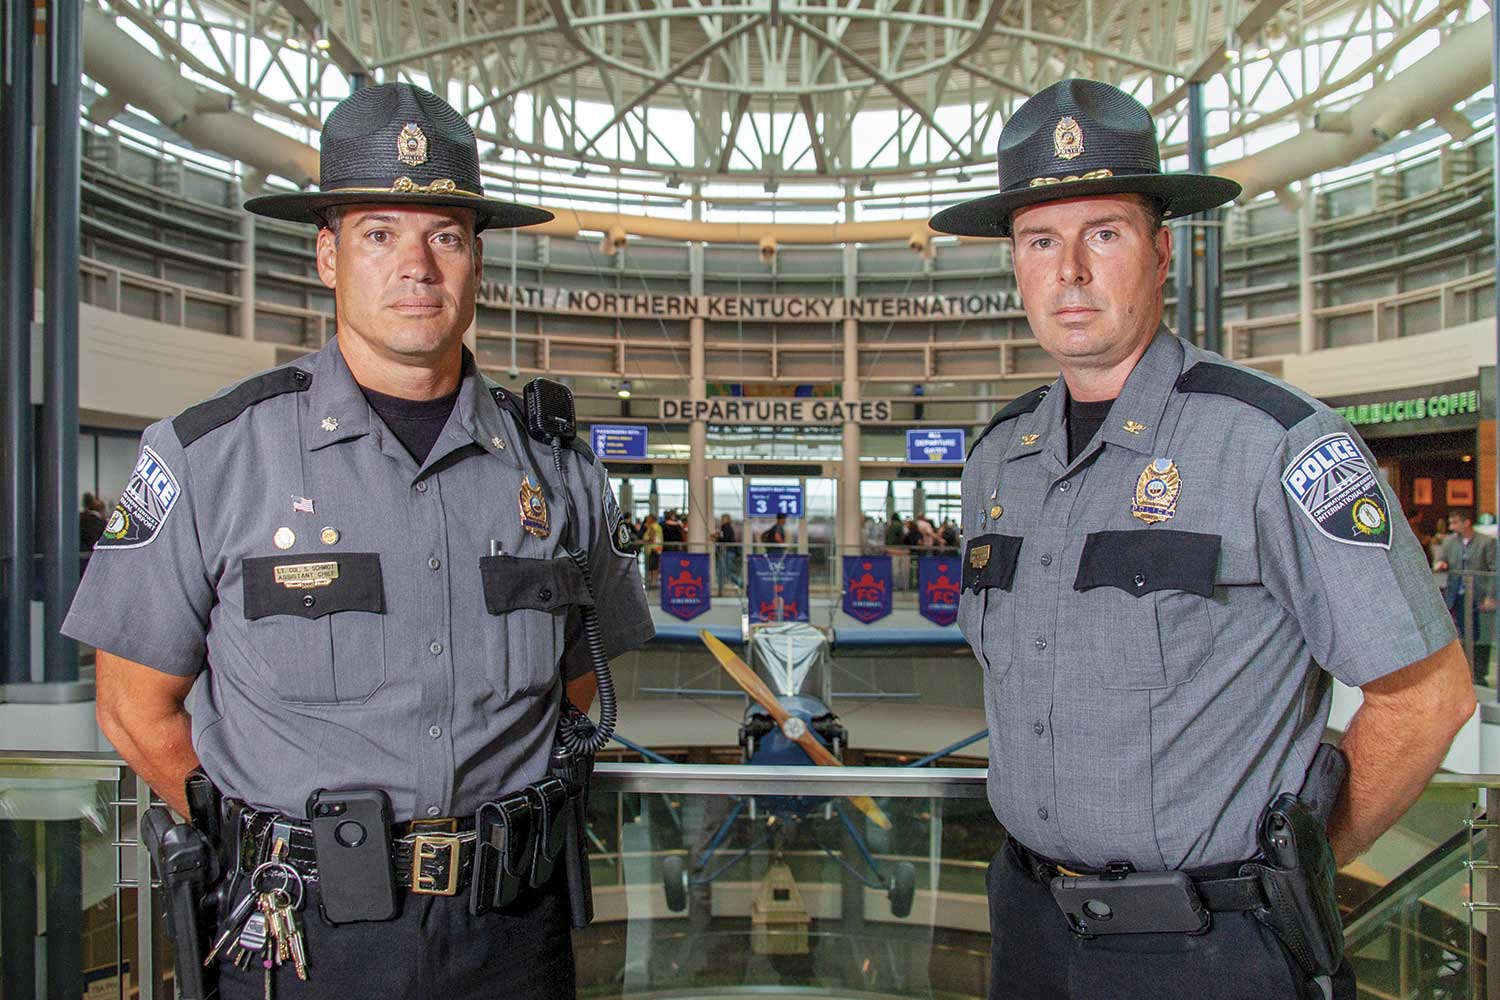  Cincinnati-Northern Kentucky International Airport Police Lt. Col. Steve Schmidt, left, and Chief Shawn Ward pose inside the airport, near the departure gates. (Photo by Jim Robertson) 